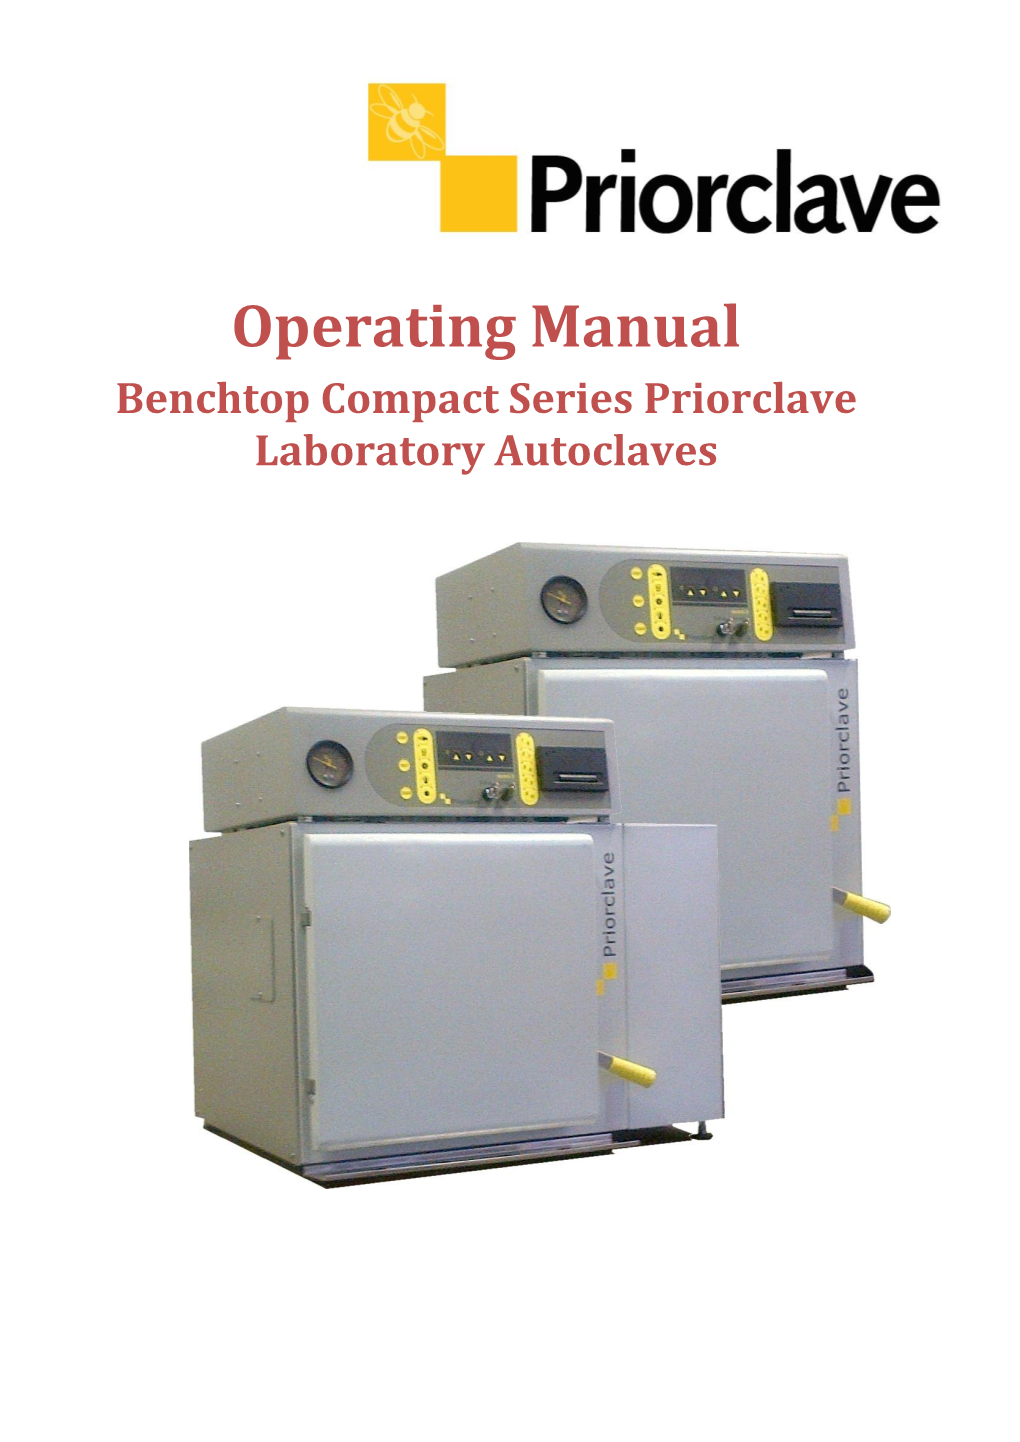 Operating Manual Benchtop Compact Series Priorclave Laboratory Autoclaves